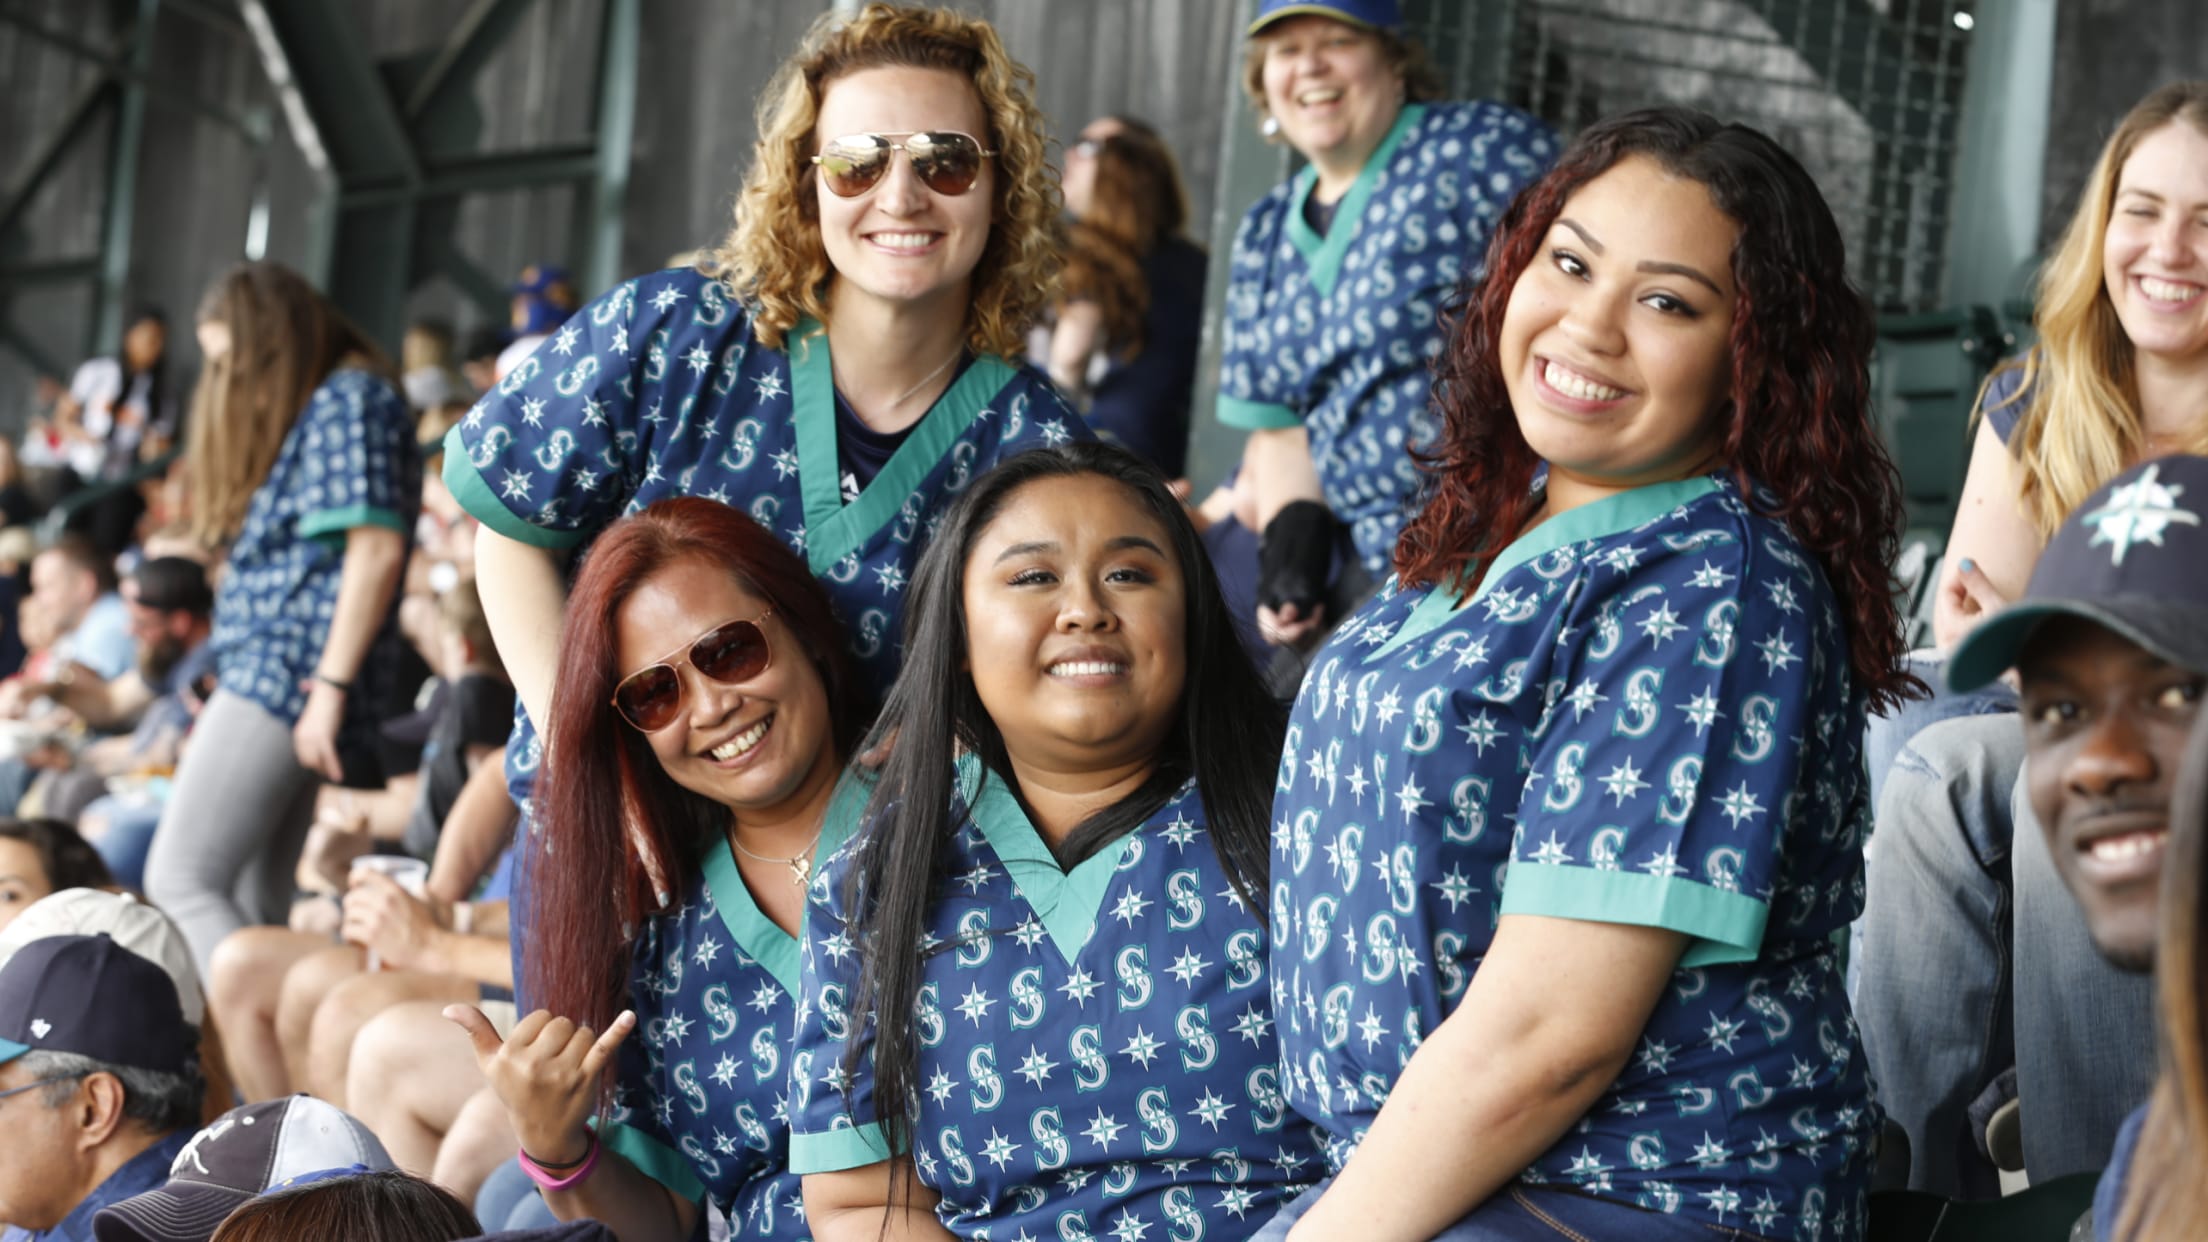 Mariners 2022 season: Opening Day, upcoming special events & giveaways